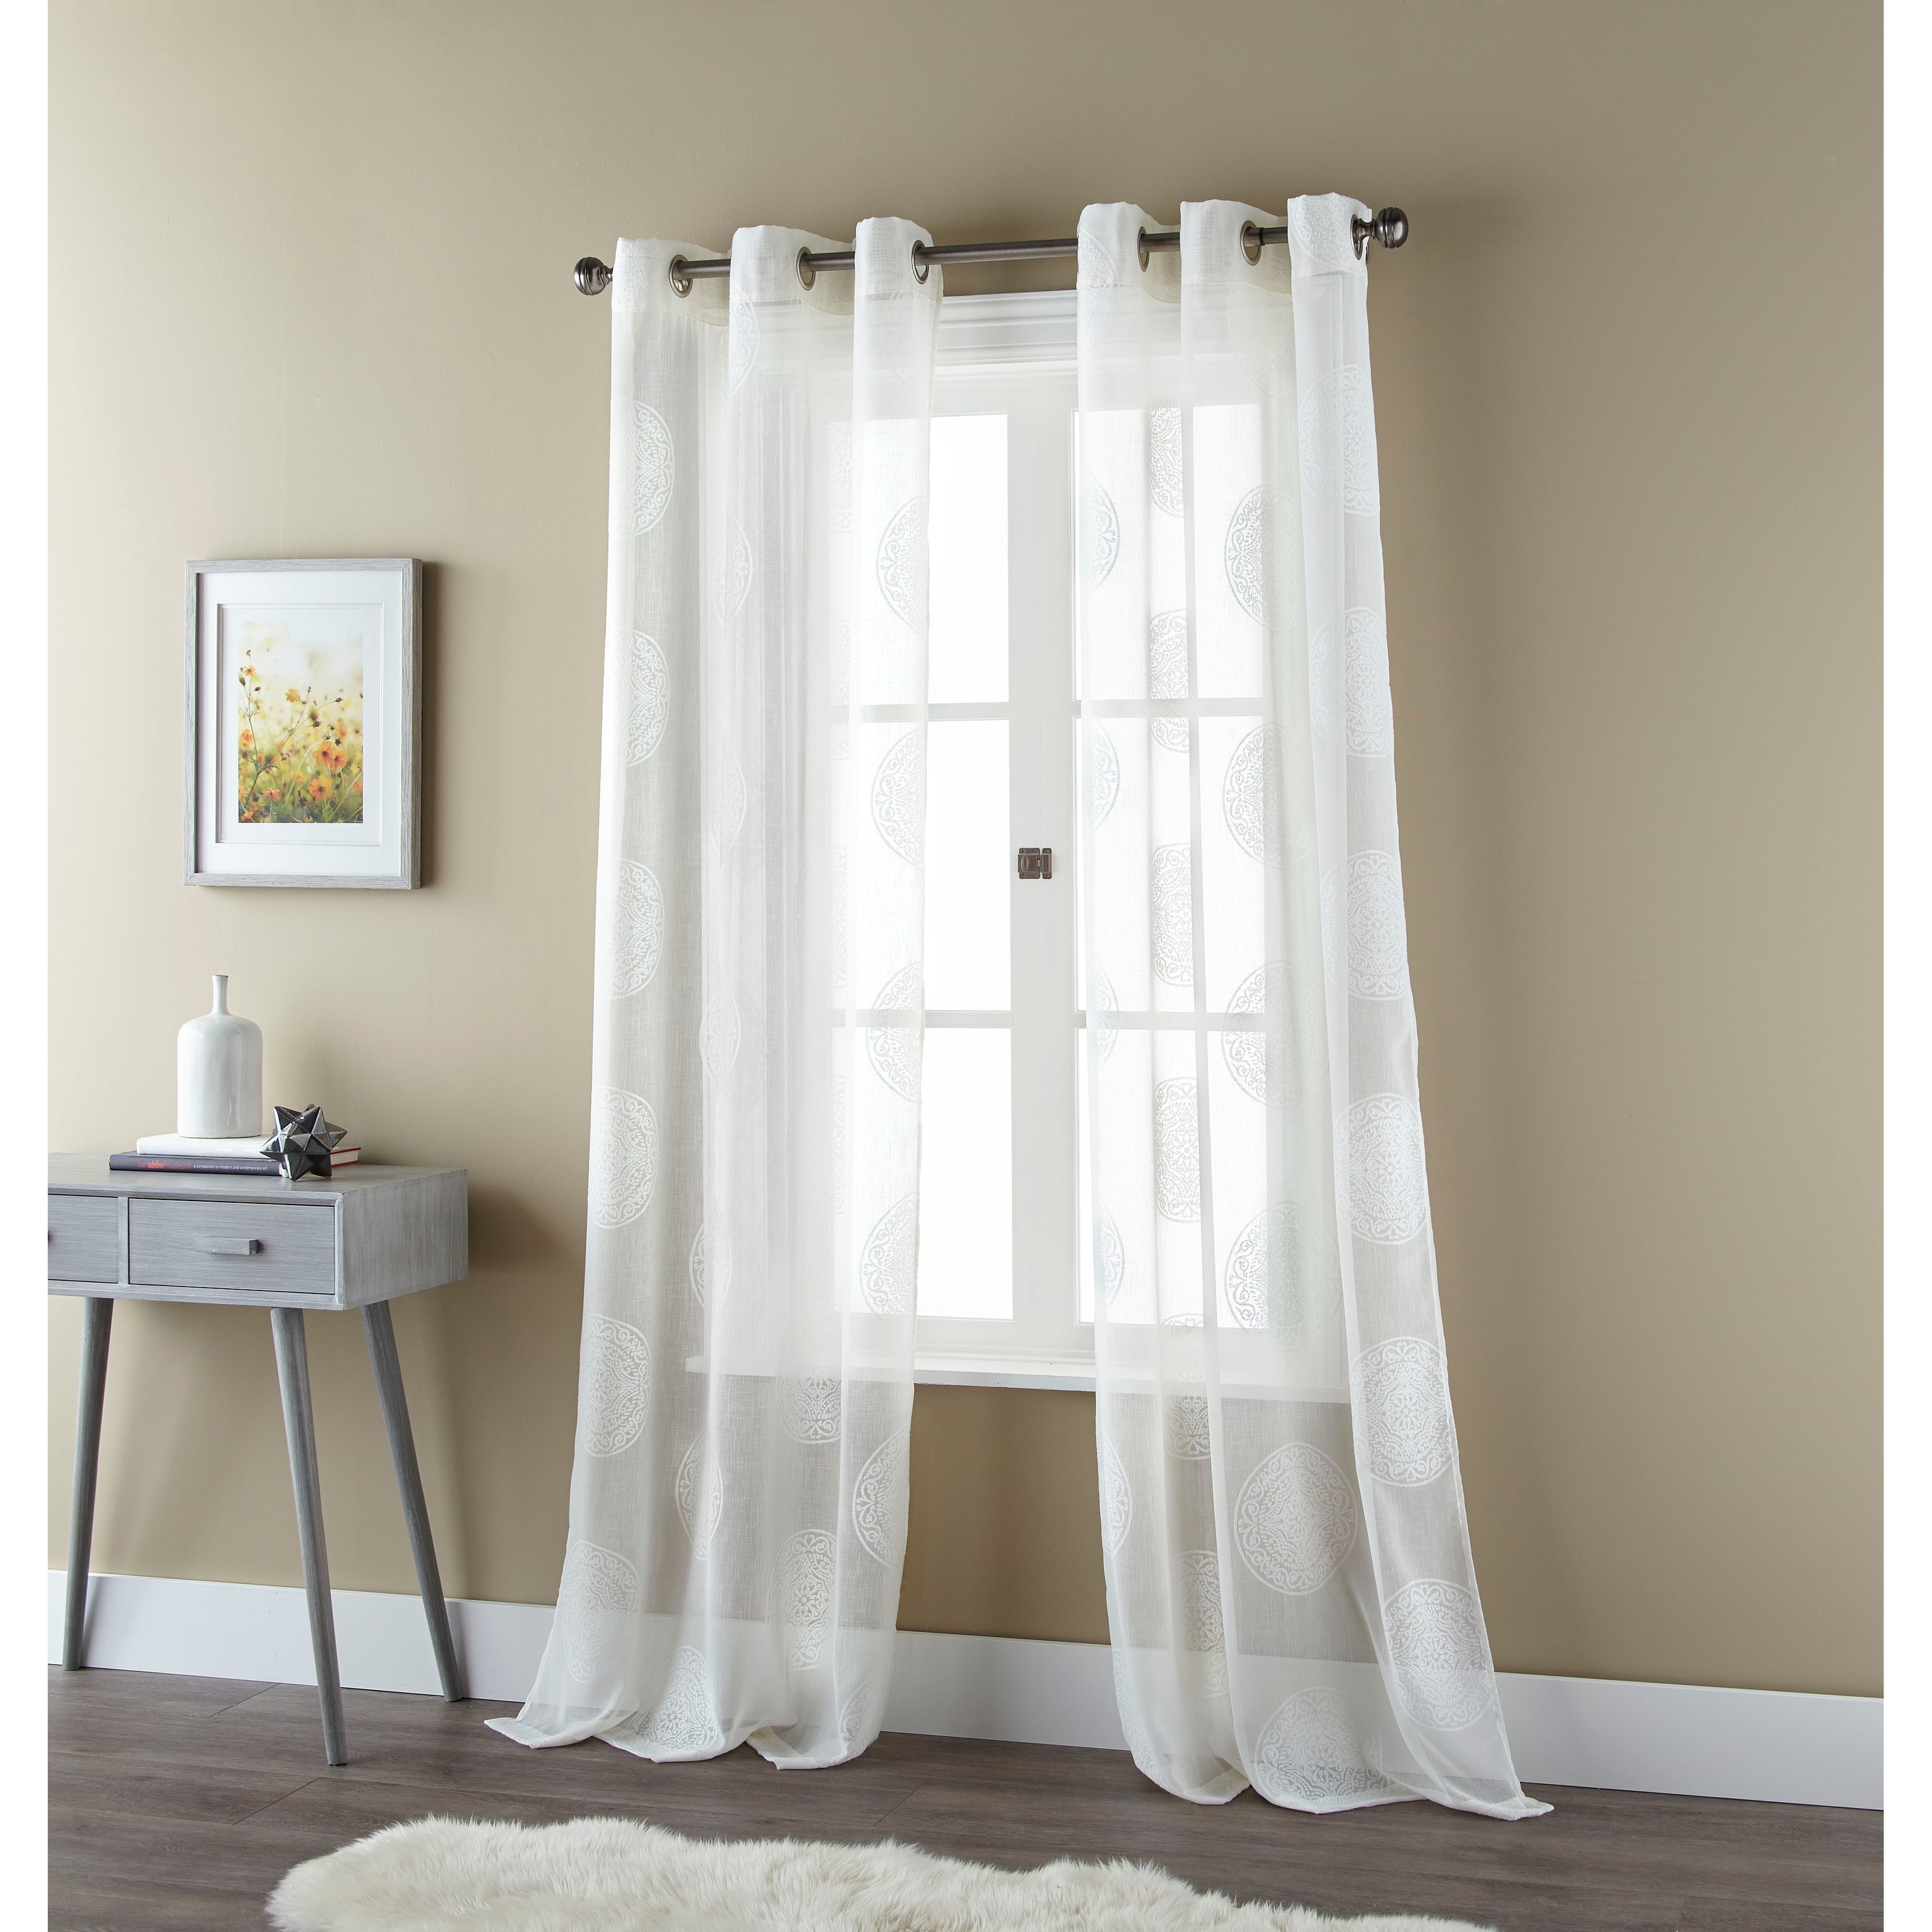 Chic Sheer Voile Ruffled Tier Window Curtain Layers Princess Panel Home Decor 